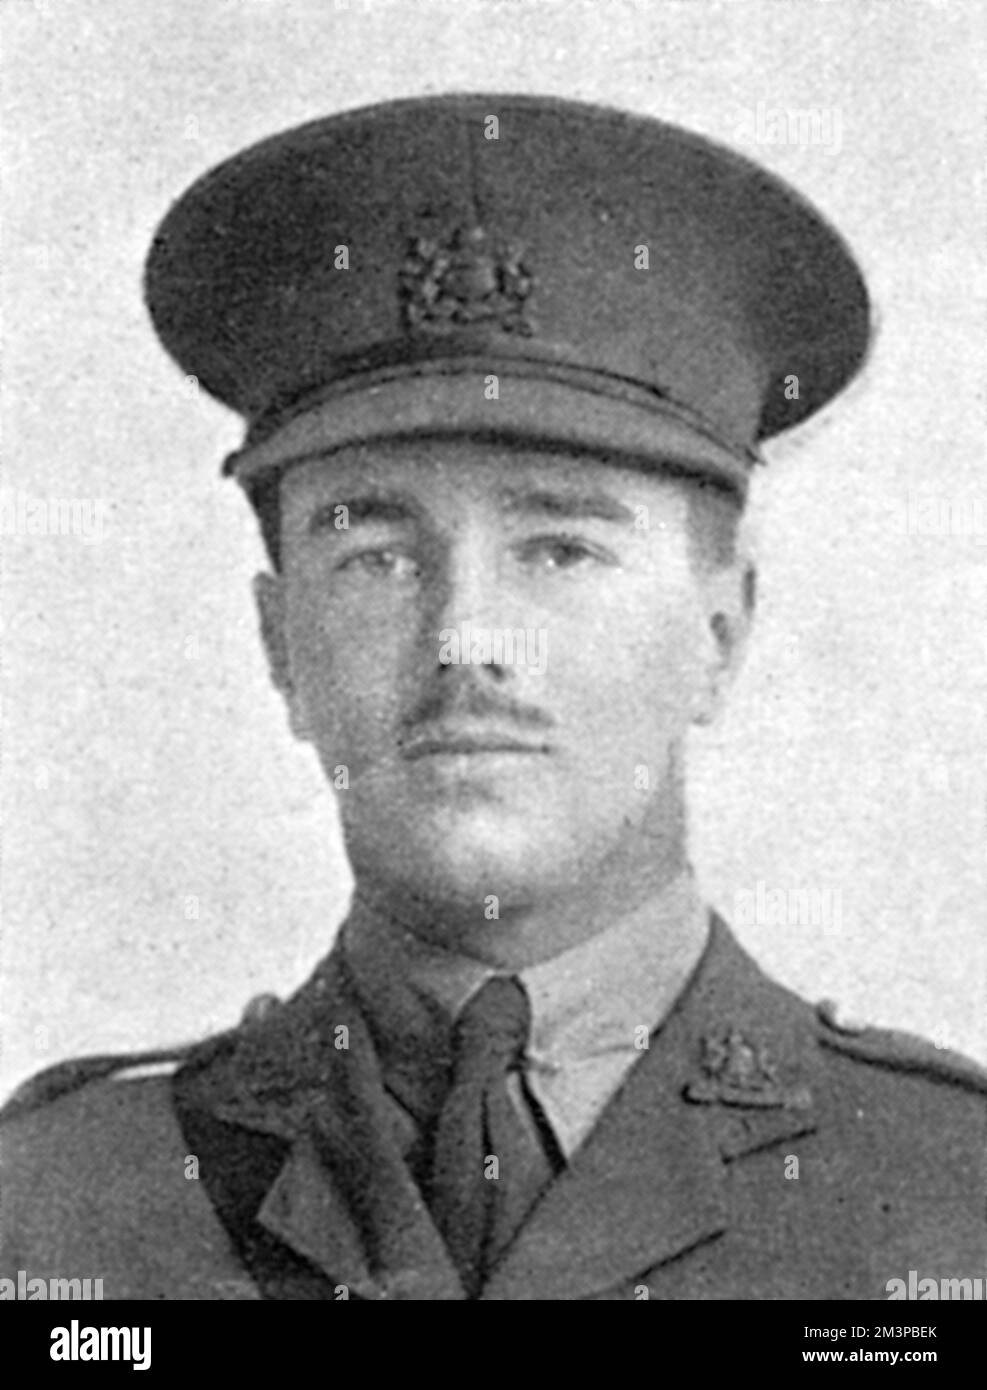 Wilfred Edward Salter Owen MC (18 March 1893  4 November 1918), English poet and soldier, one of the leading poets of the First World War.  Photograph of him in uniform as a 2nd Lieutenant with the Manchester Regiment.  He was killed in action near the Sambre Canal on 4 November 1918, a week before the ceasing of hostilities.     Date: 1918 Stock Photo